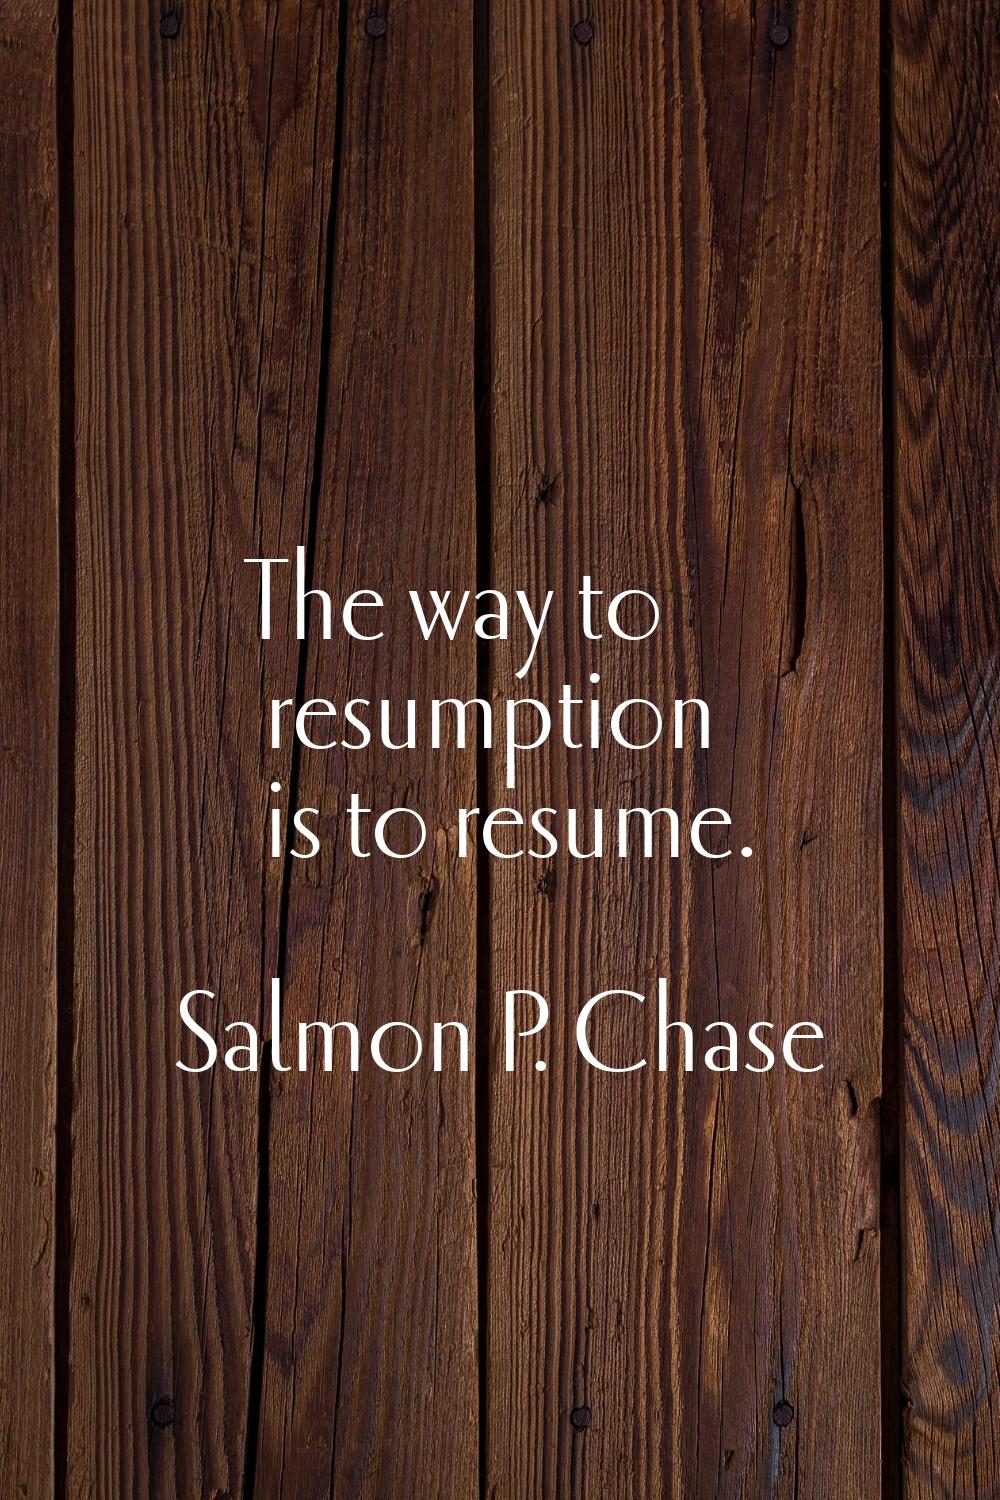 The way to resumption is to resume.